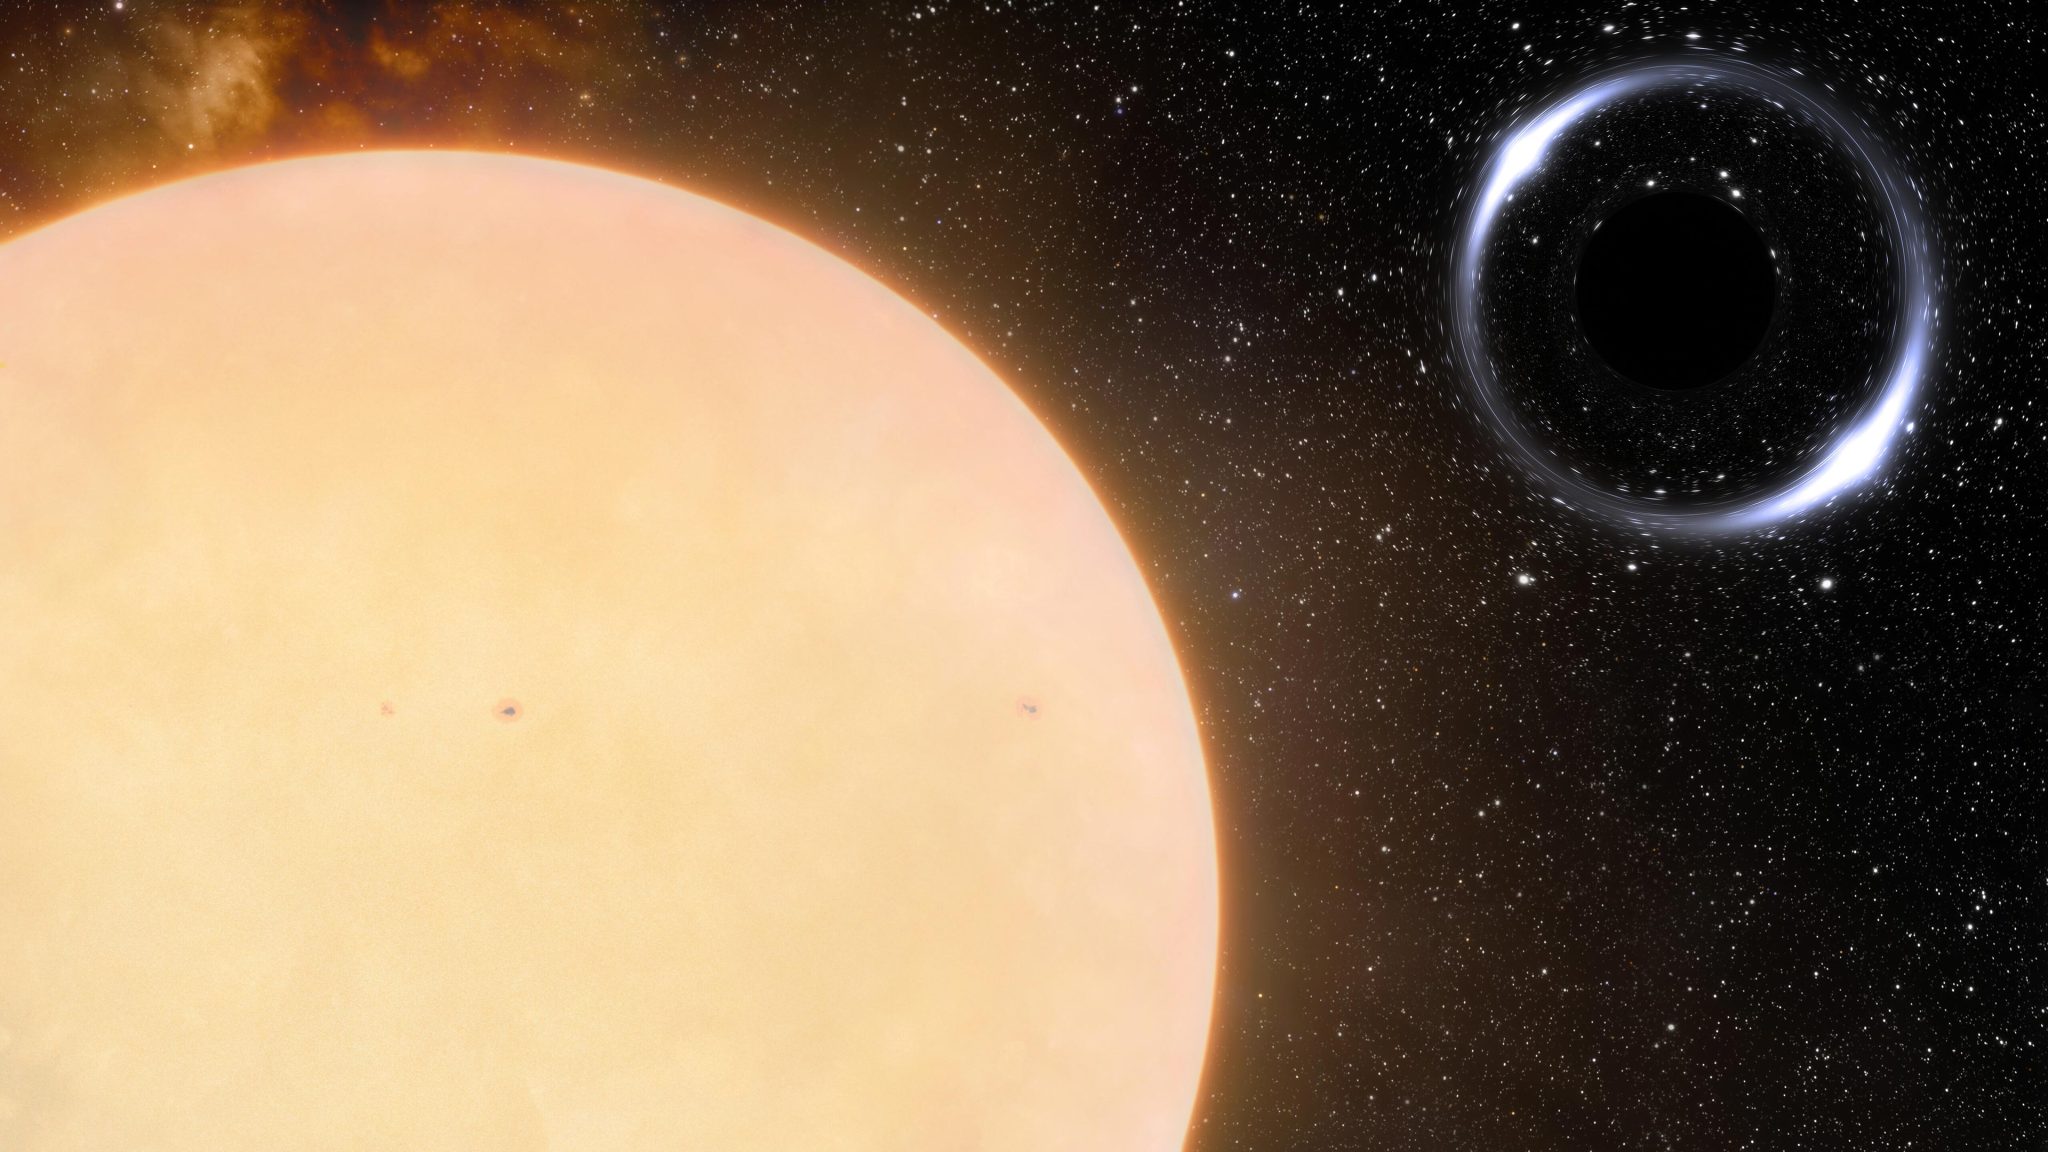 Artist's impression of the closest black hole to Earth and its sun-like companion